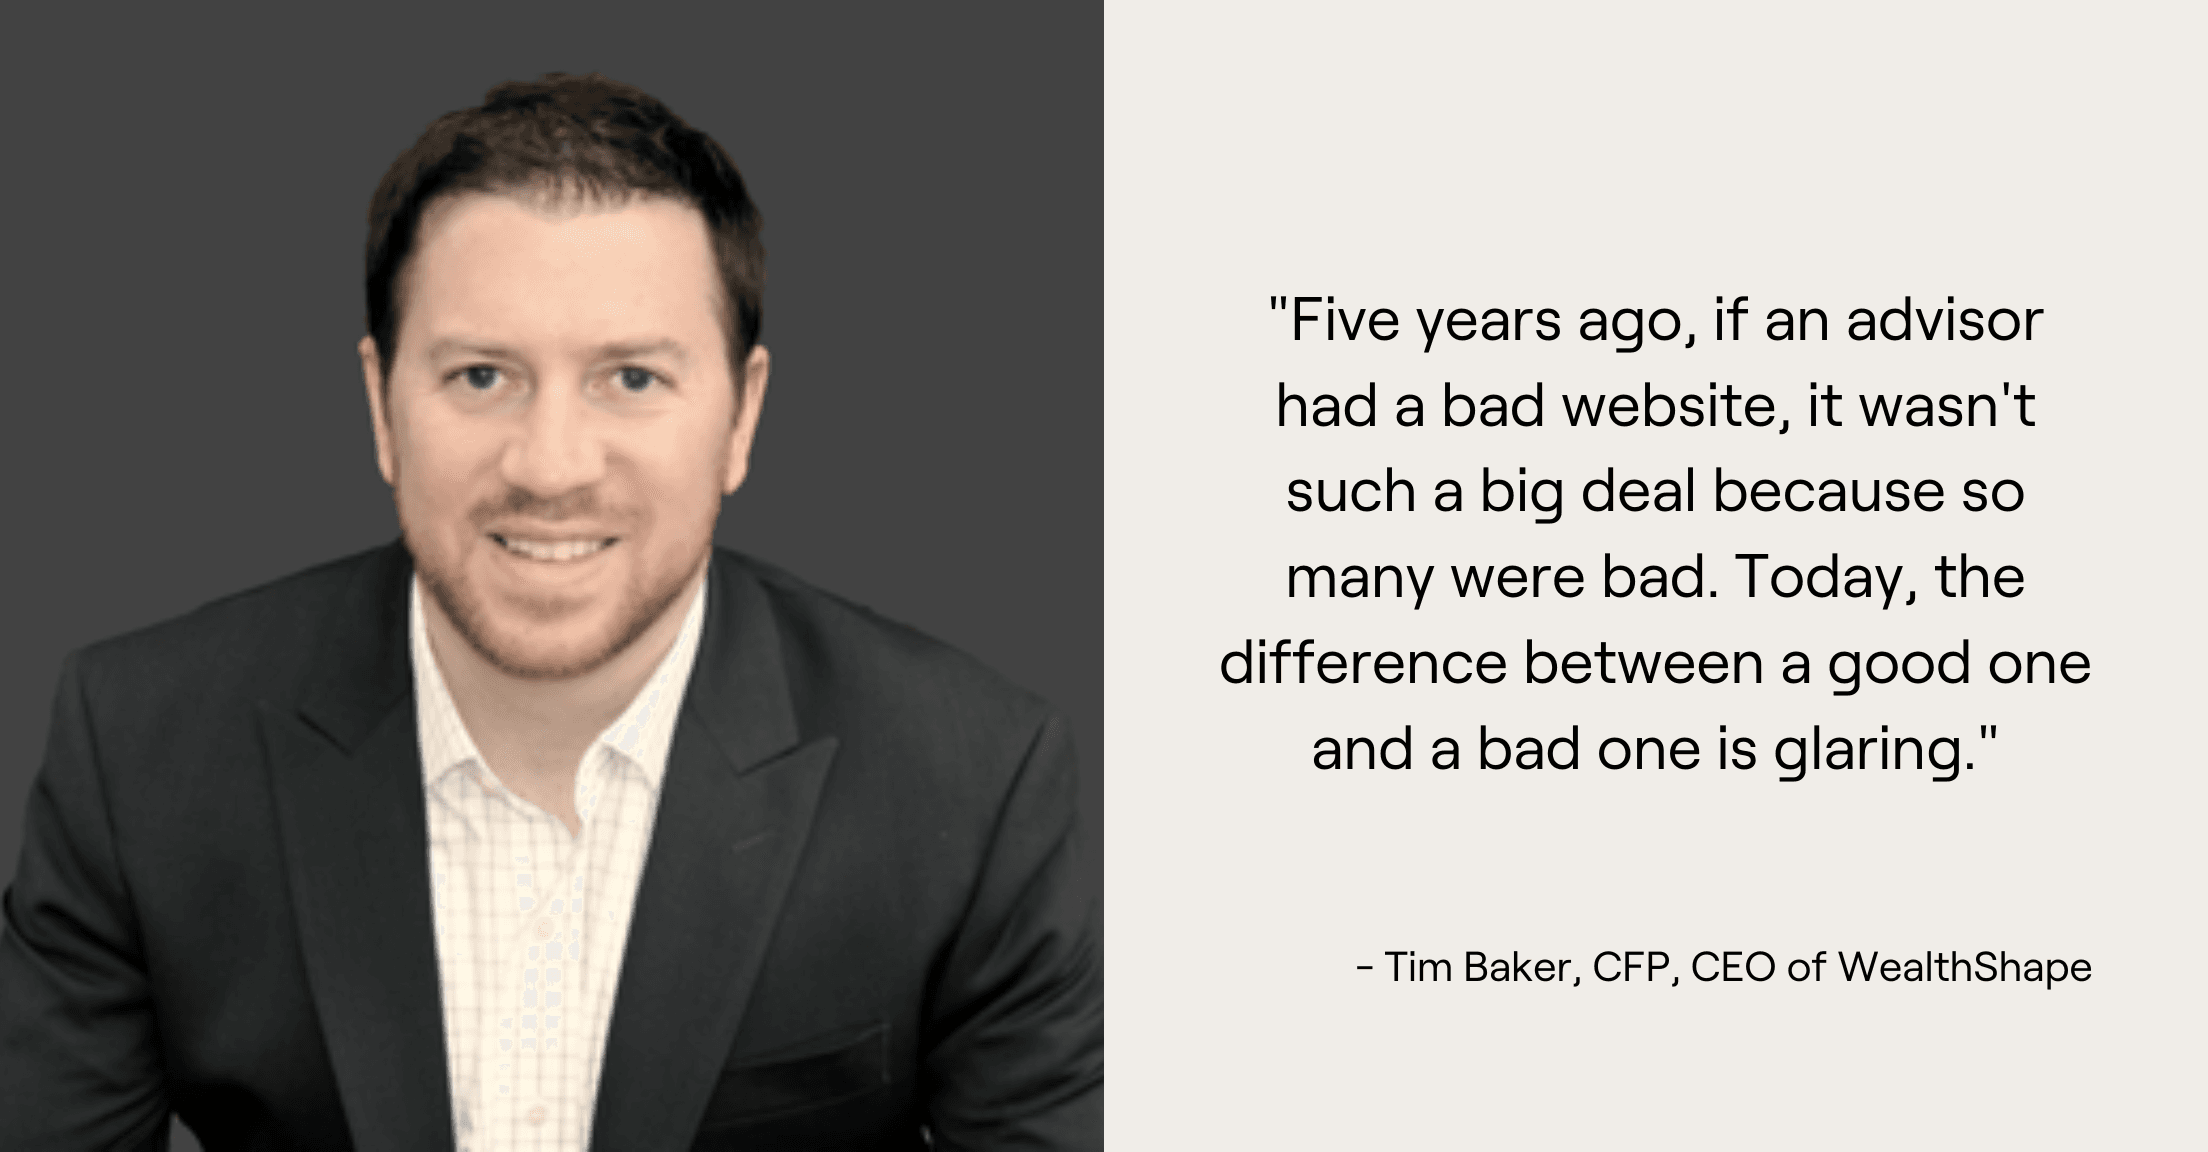 Headshot of advisor Tim Baker with quote, "Five years ago, if an advisor had a bad website, it wasn't such a big deal because so many were bad. Today, the difference between a good one and a bad one is glaring."